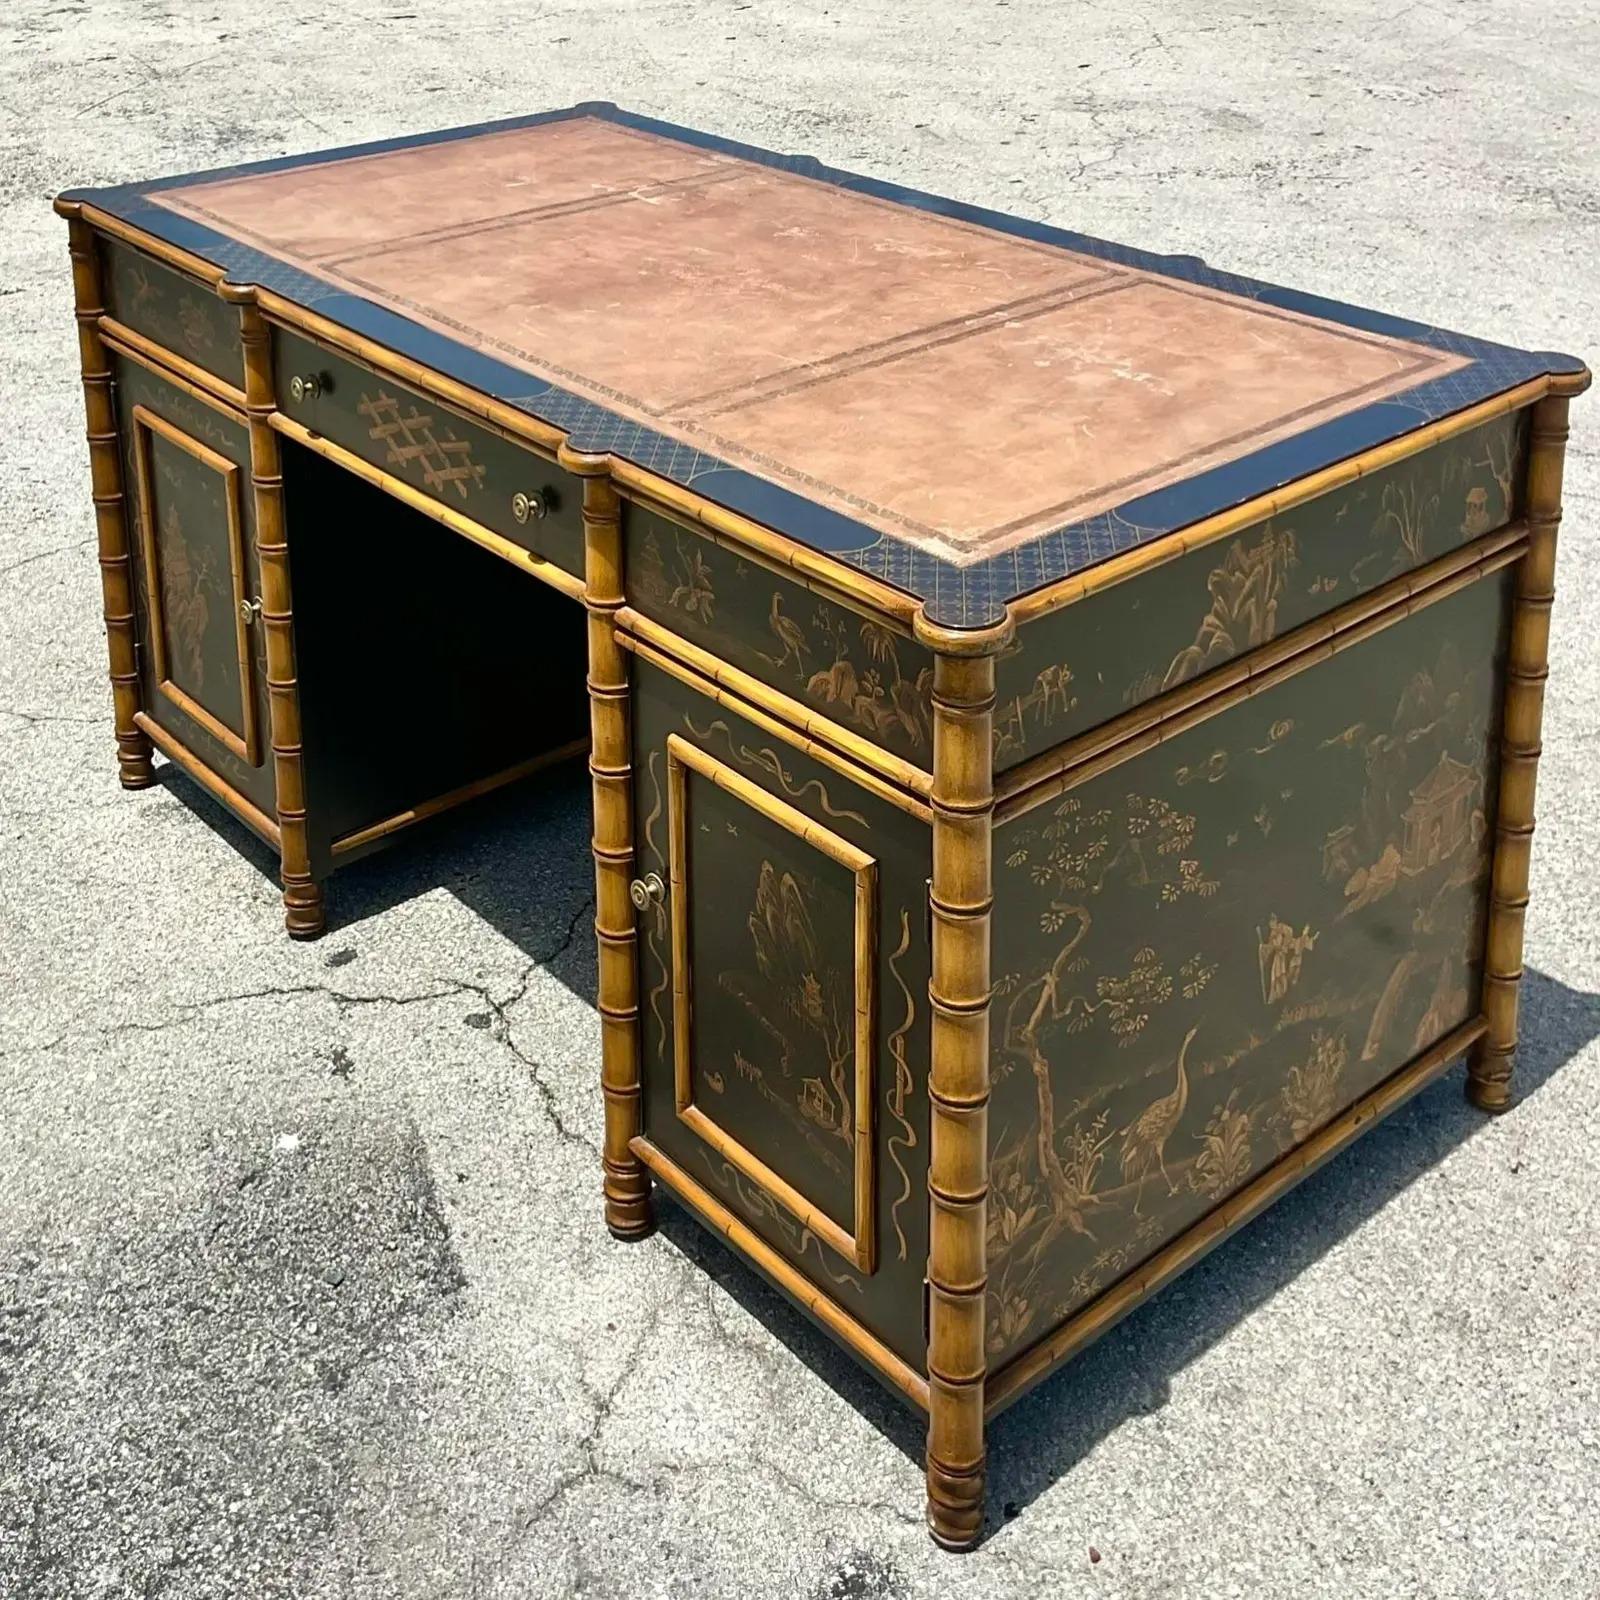 A fantastic vintage Asian partners desk. Made by the iconic Julia Gray group. A gorgeous hand painted Chinoiserie design in blacks and golds. All drawers operable on one side and the reverse is open cabinets and no drawers. Stunning from all sides